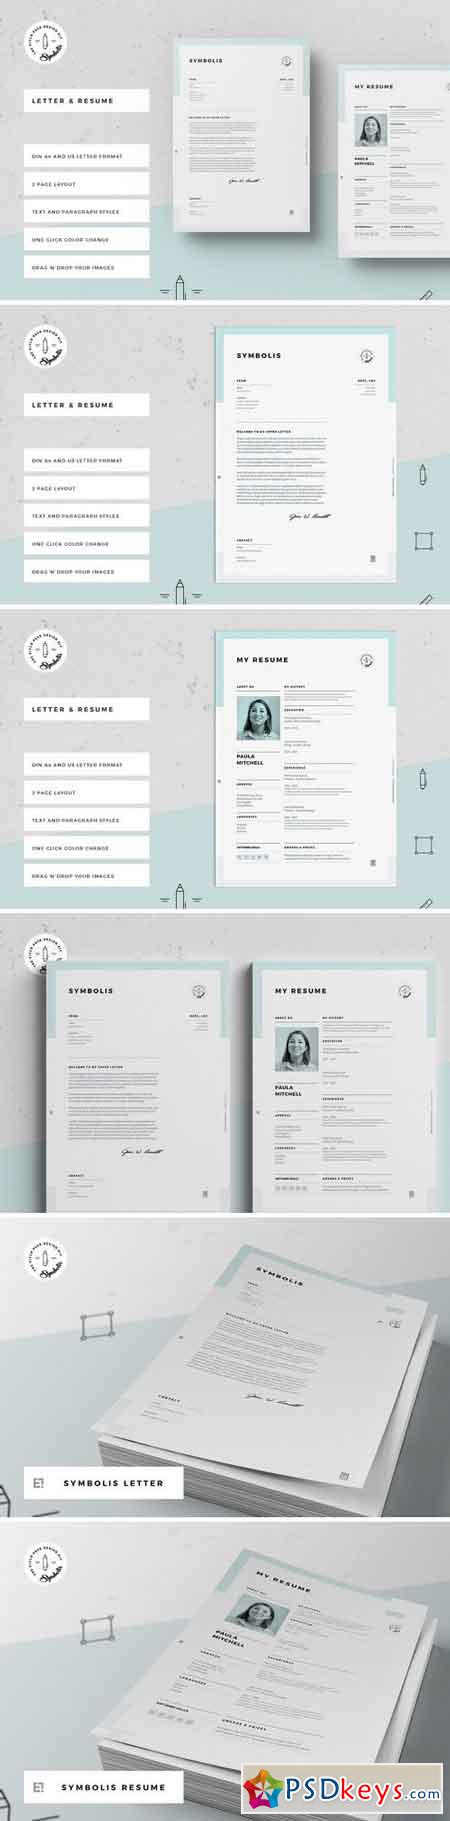 Symbolis Resume and Letter 1506355